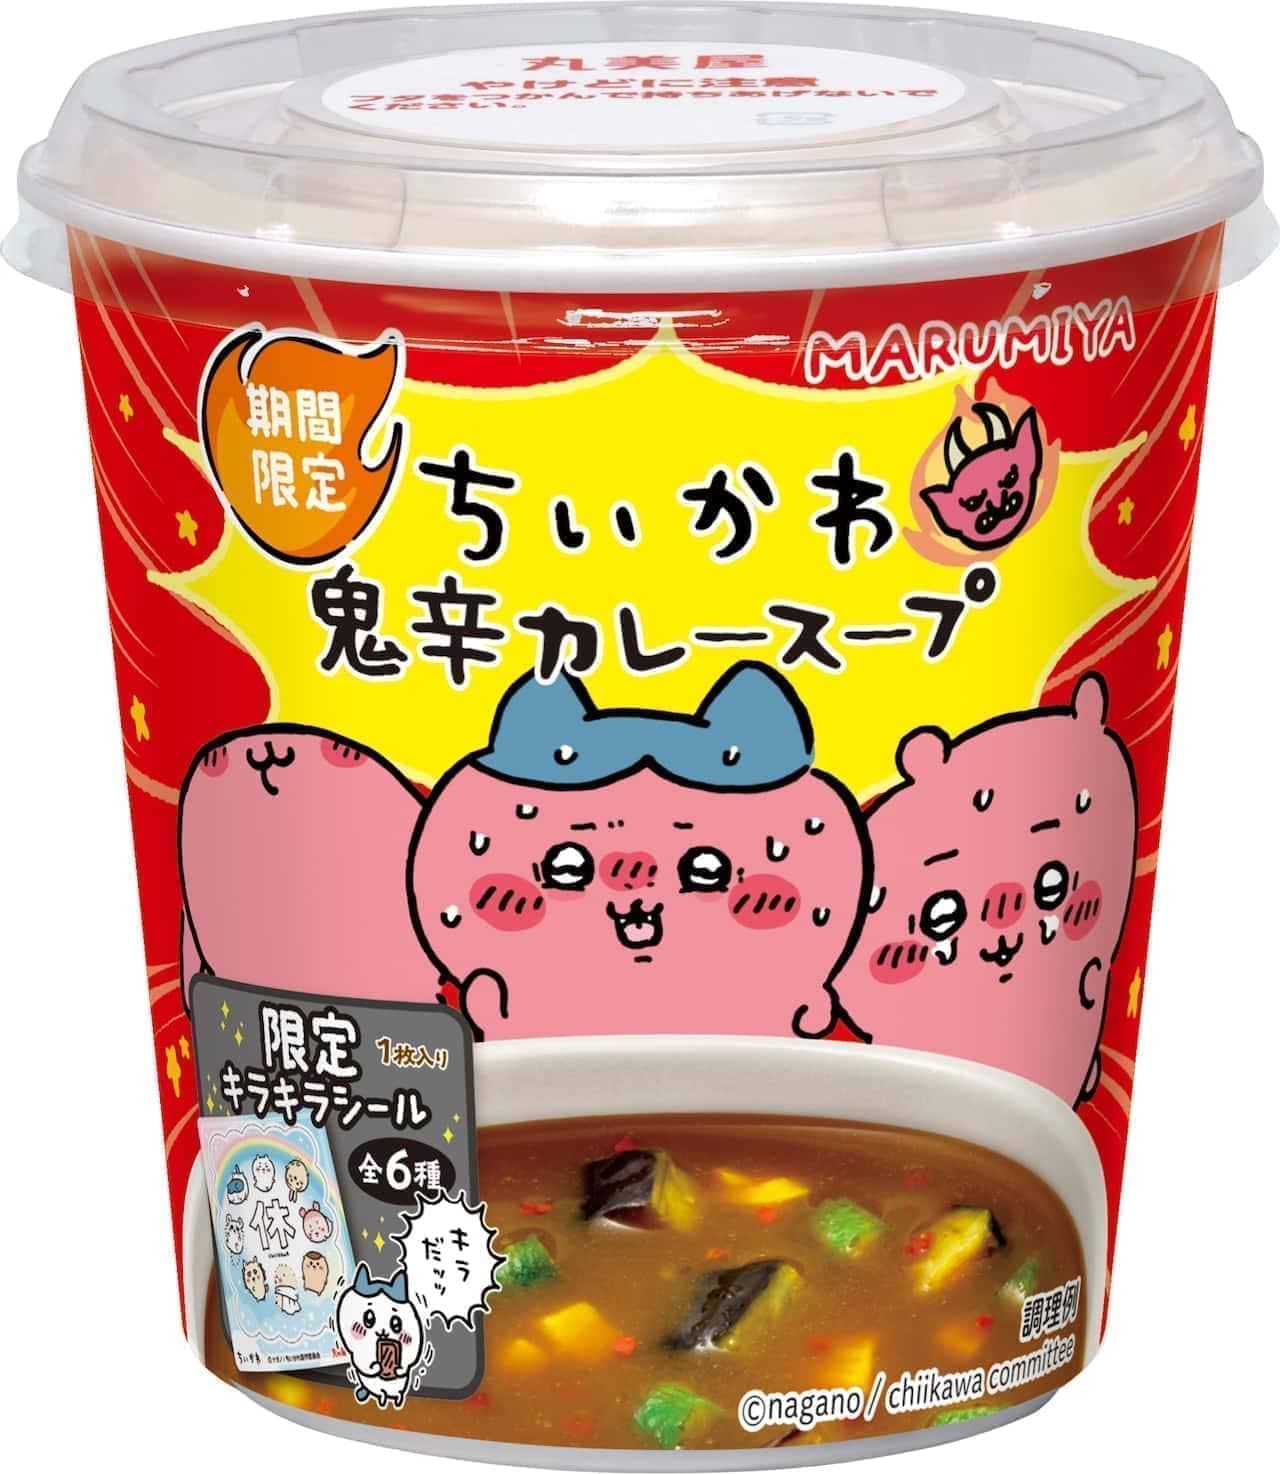 Chiikawa Cup Soup Demon Spicy Curry Soup